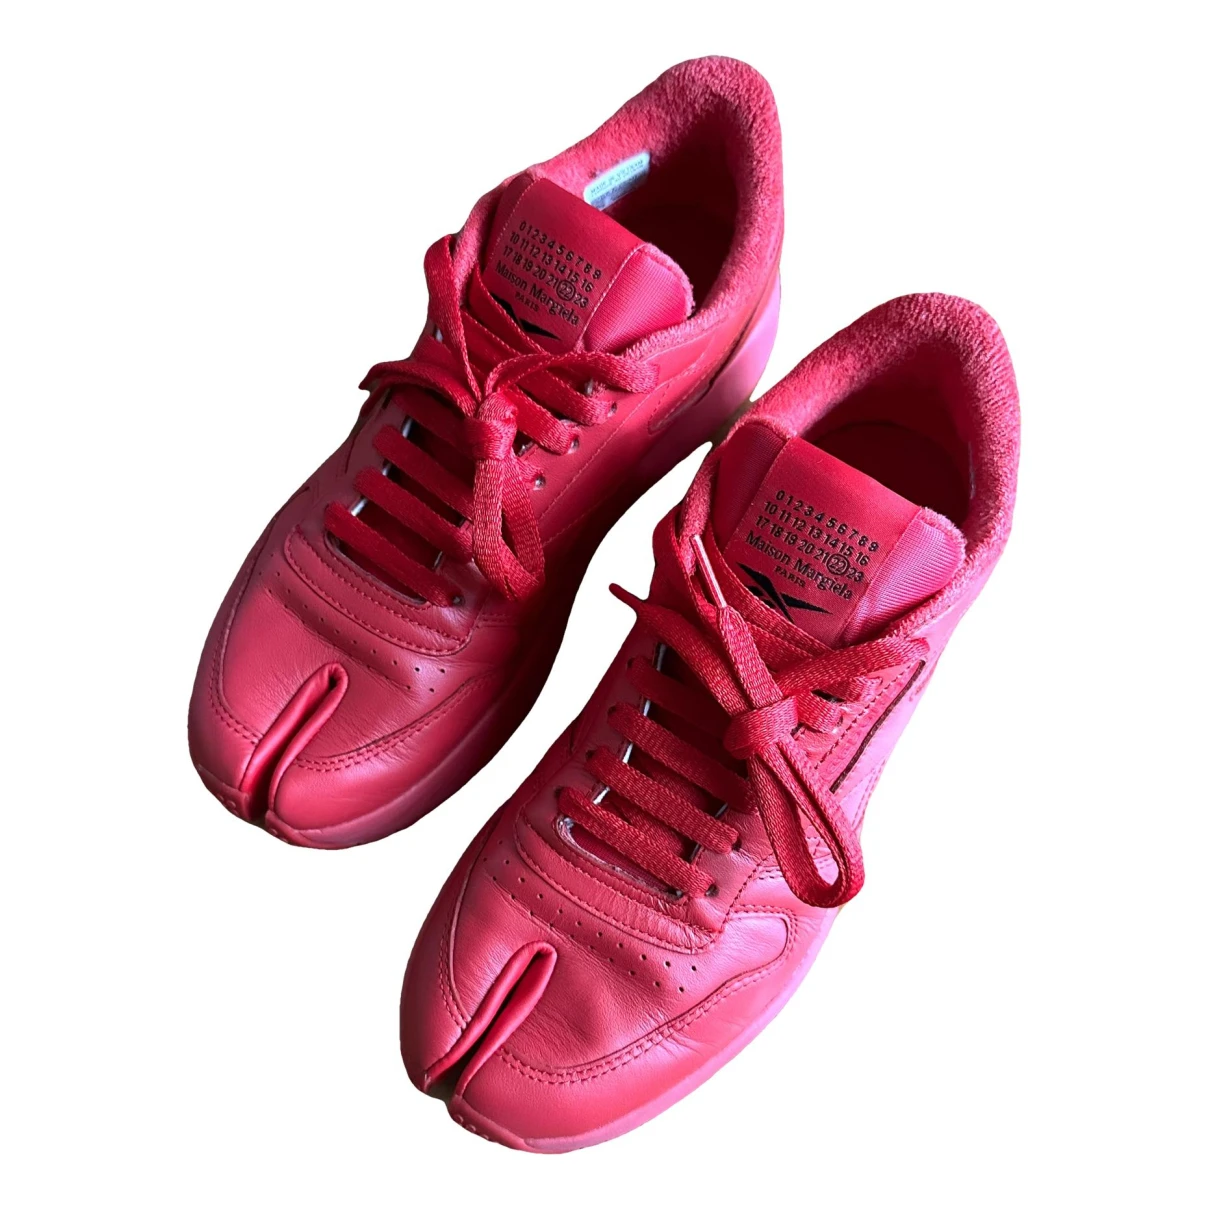 Pre-owned Maison Margiela X Reebok Tabi Project 0 Leather Trainers In Red